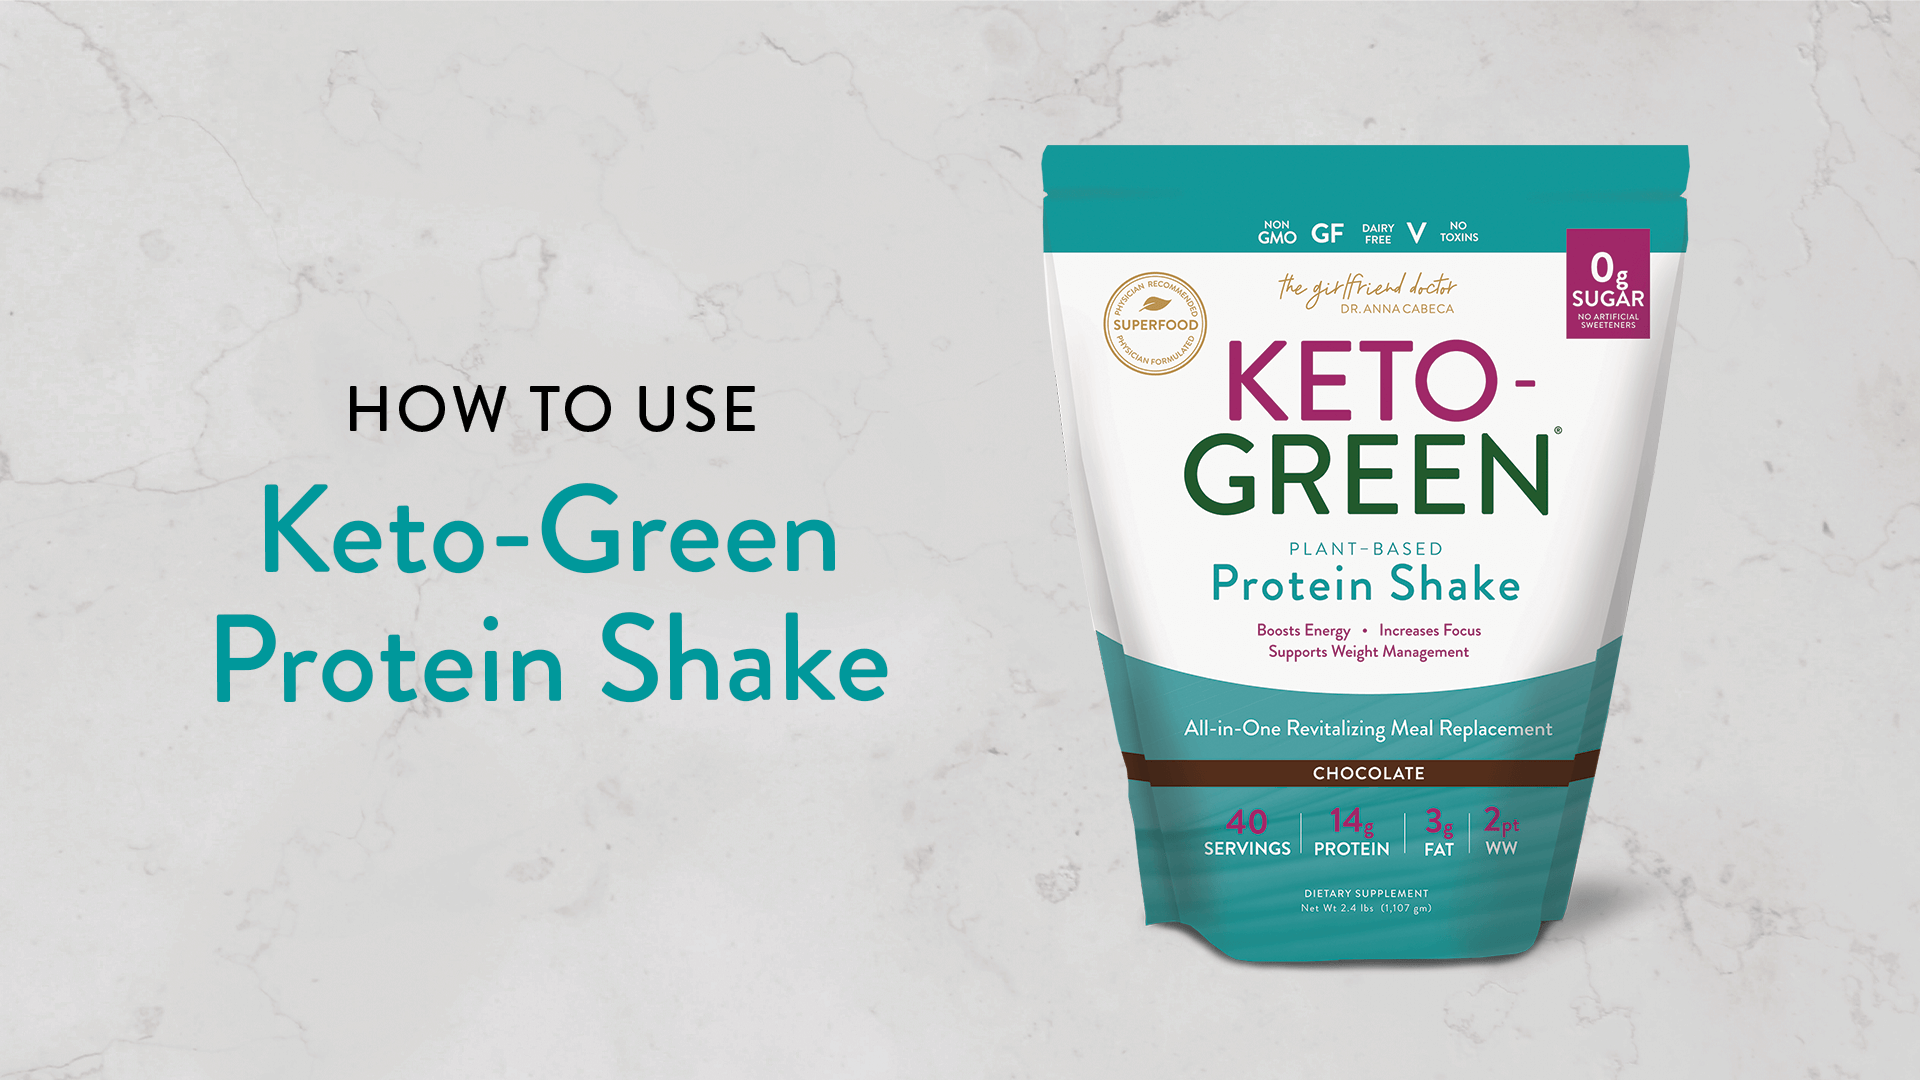 Load video: How to use Keto-Green Protein Shake